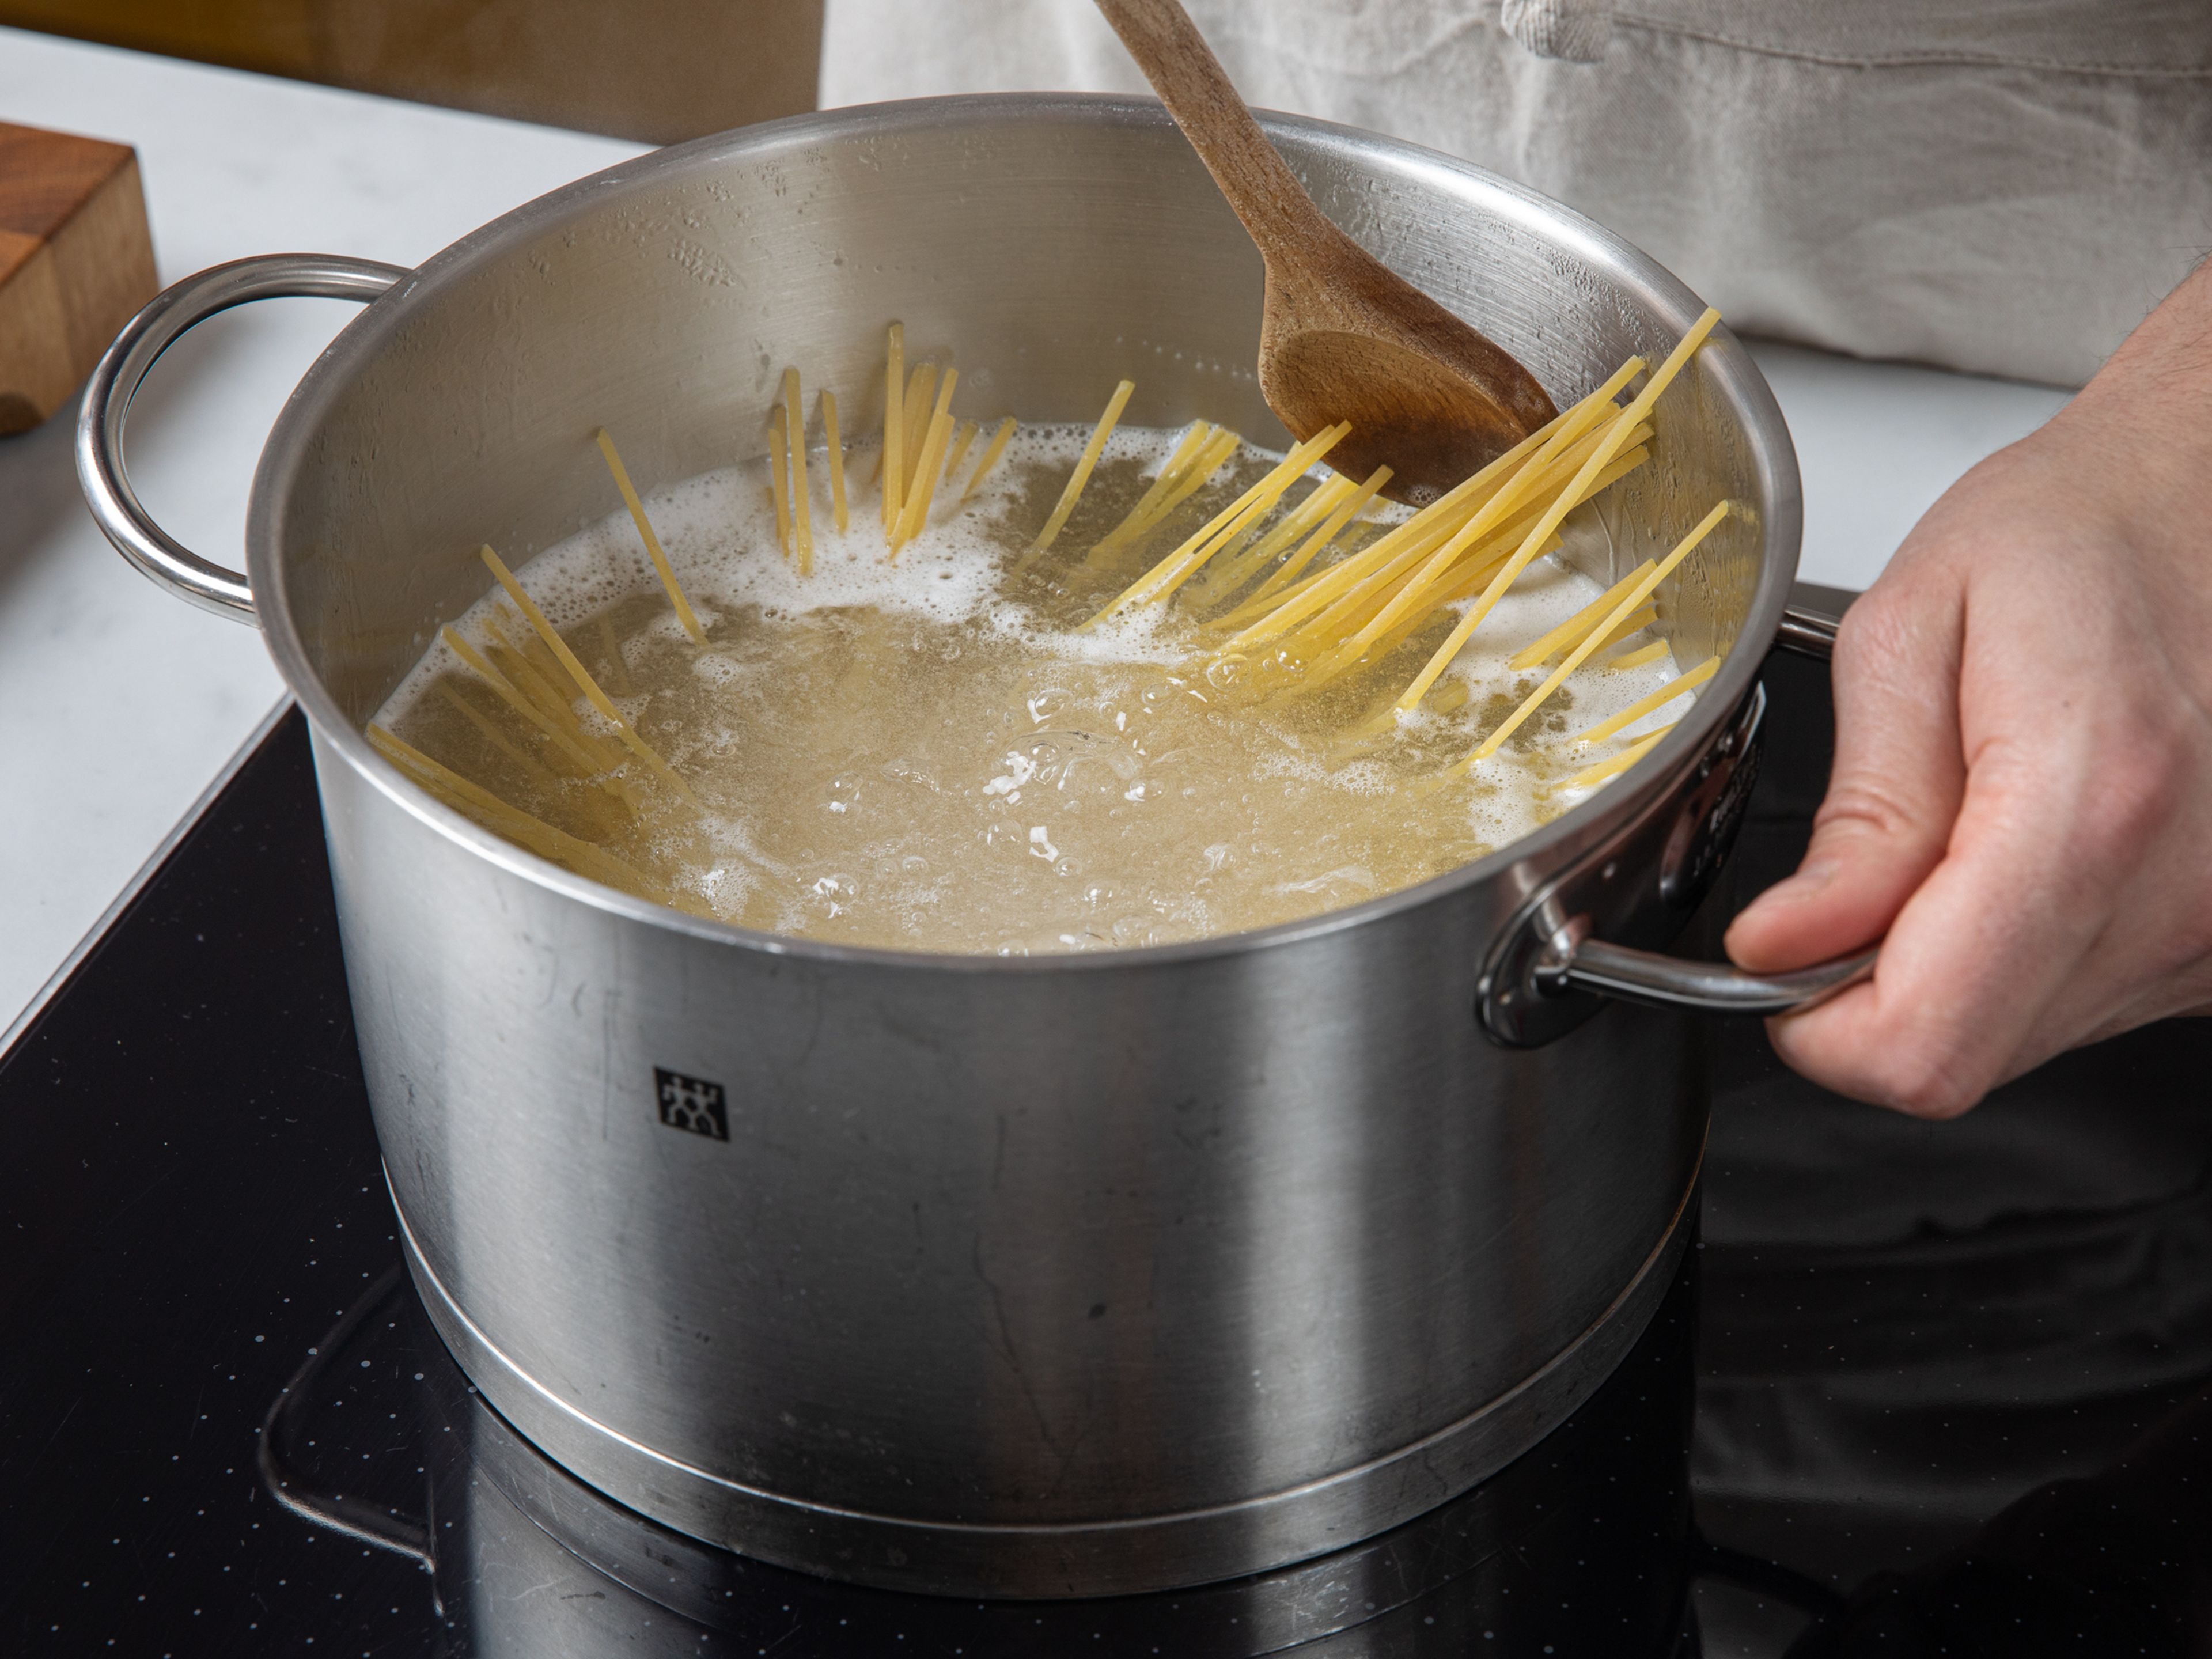 Fill the large pot from step 1 with plenty of water, add enough salt and bring to a boil. Once the water is boiling, add linguine and cook according to package directions until al dente. Reserve a small portion (about 100ml) of the pasta cooking water and drain the pasta. Keep the pasta in the pot.